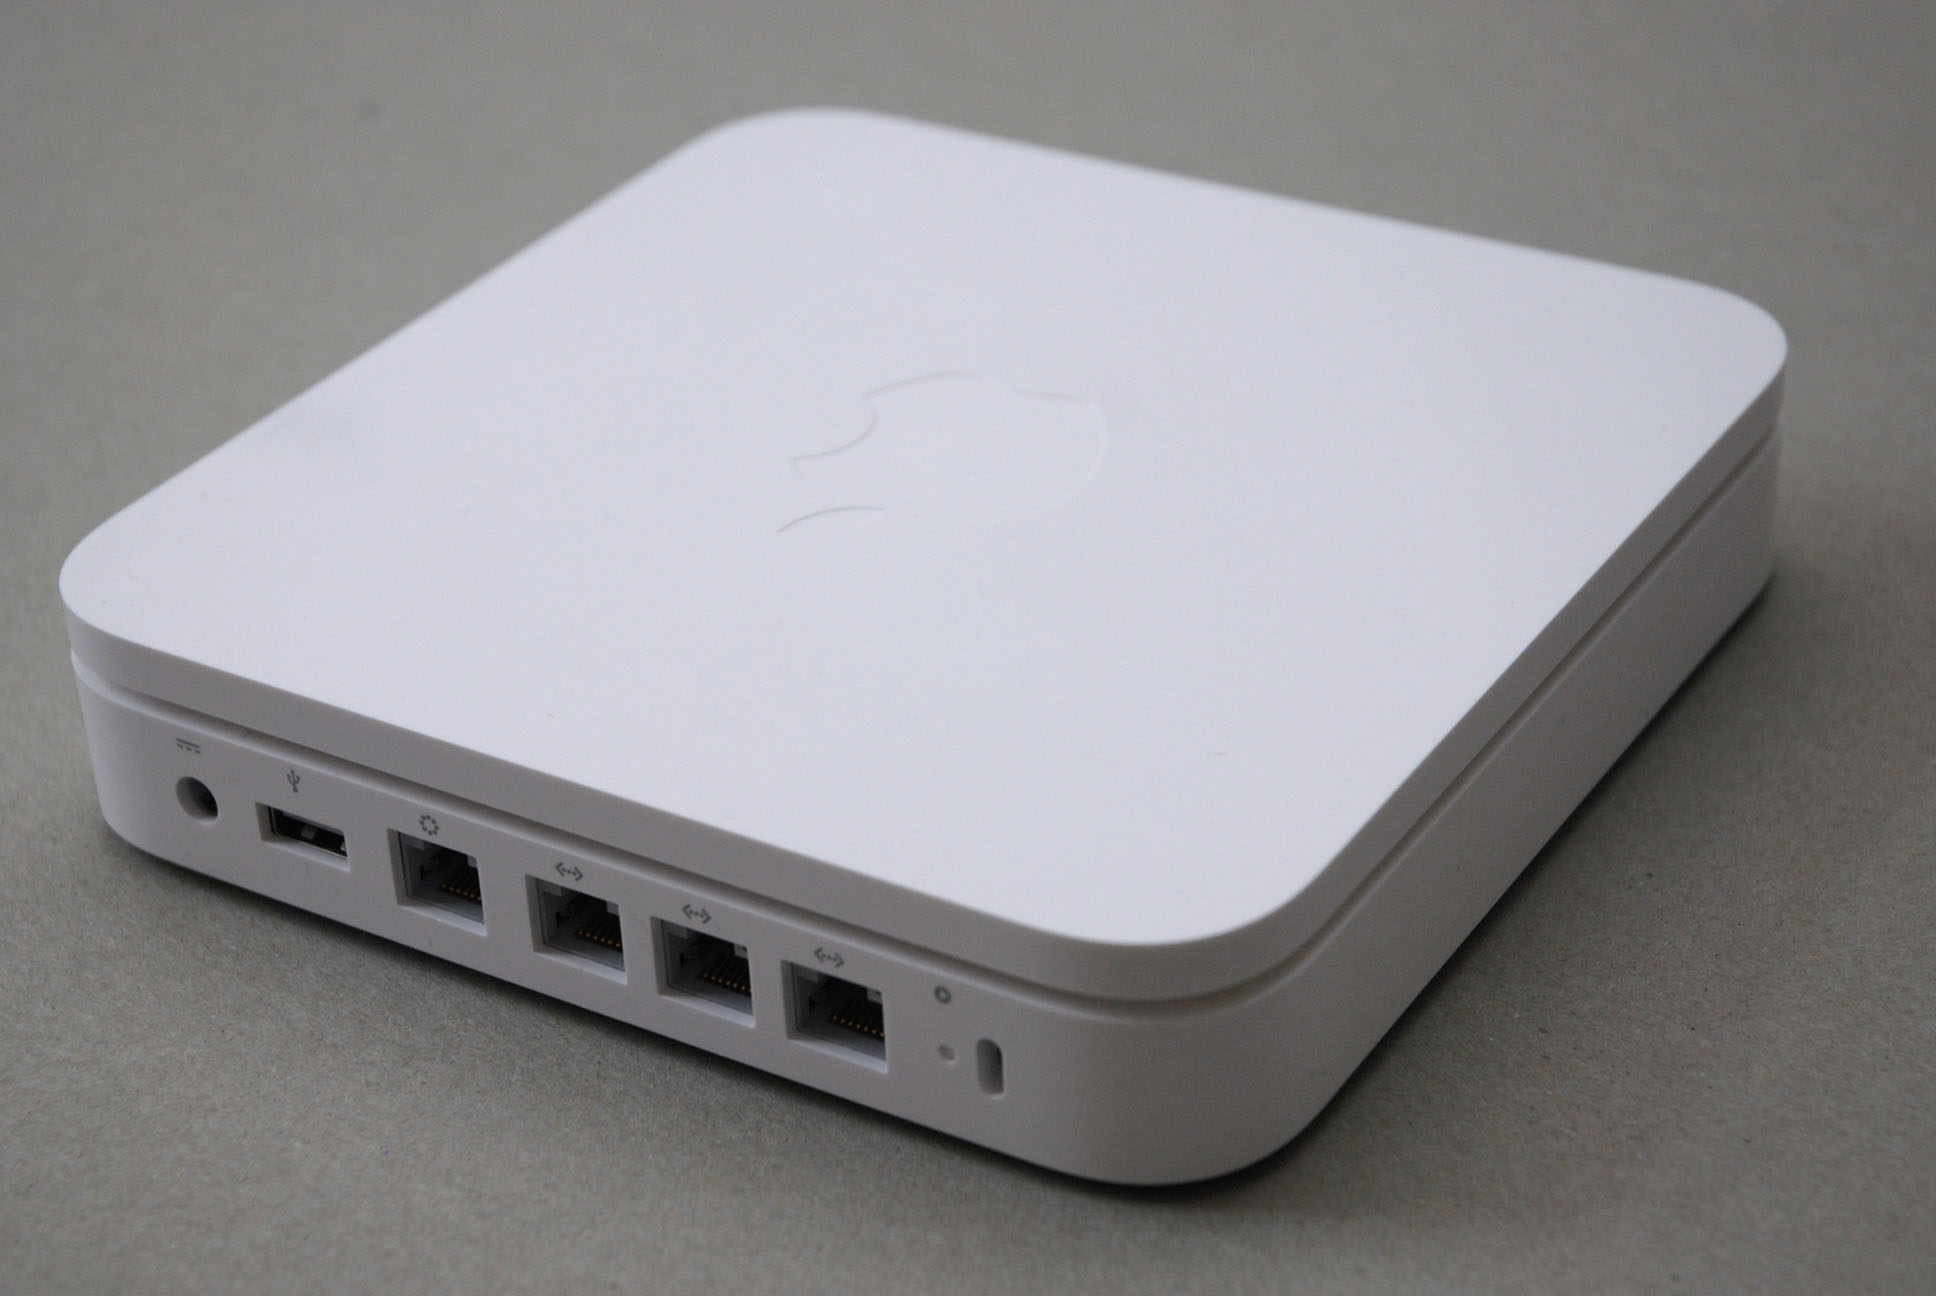 Airport Extreme Base Station